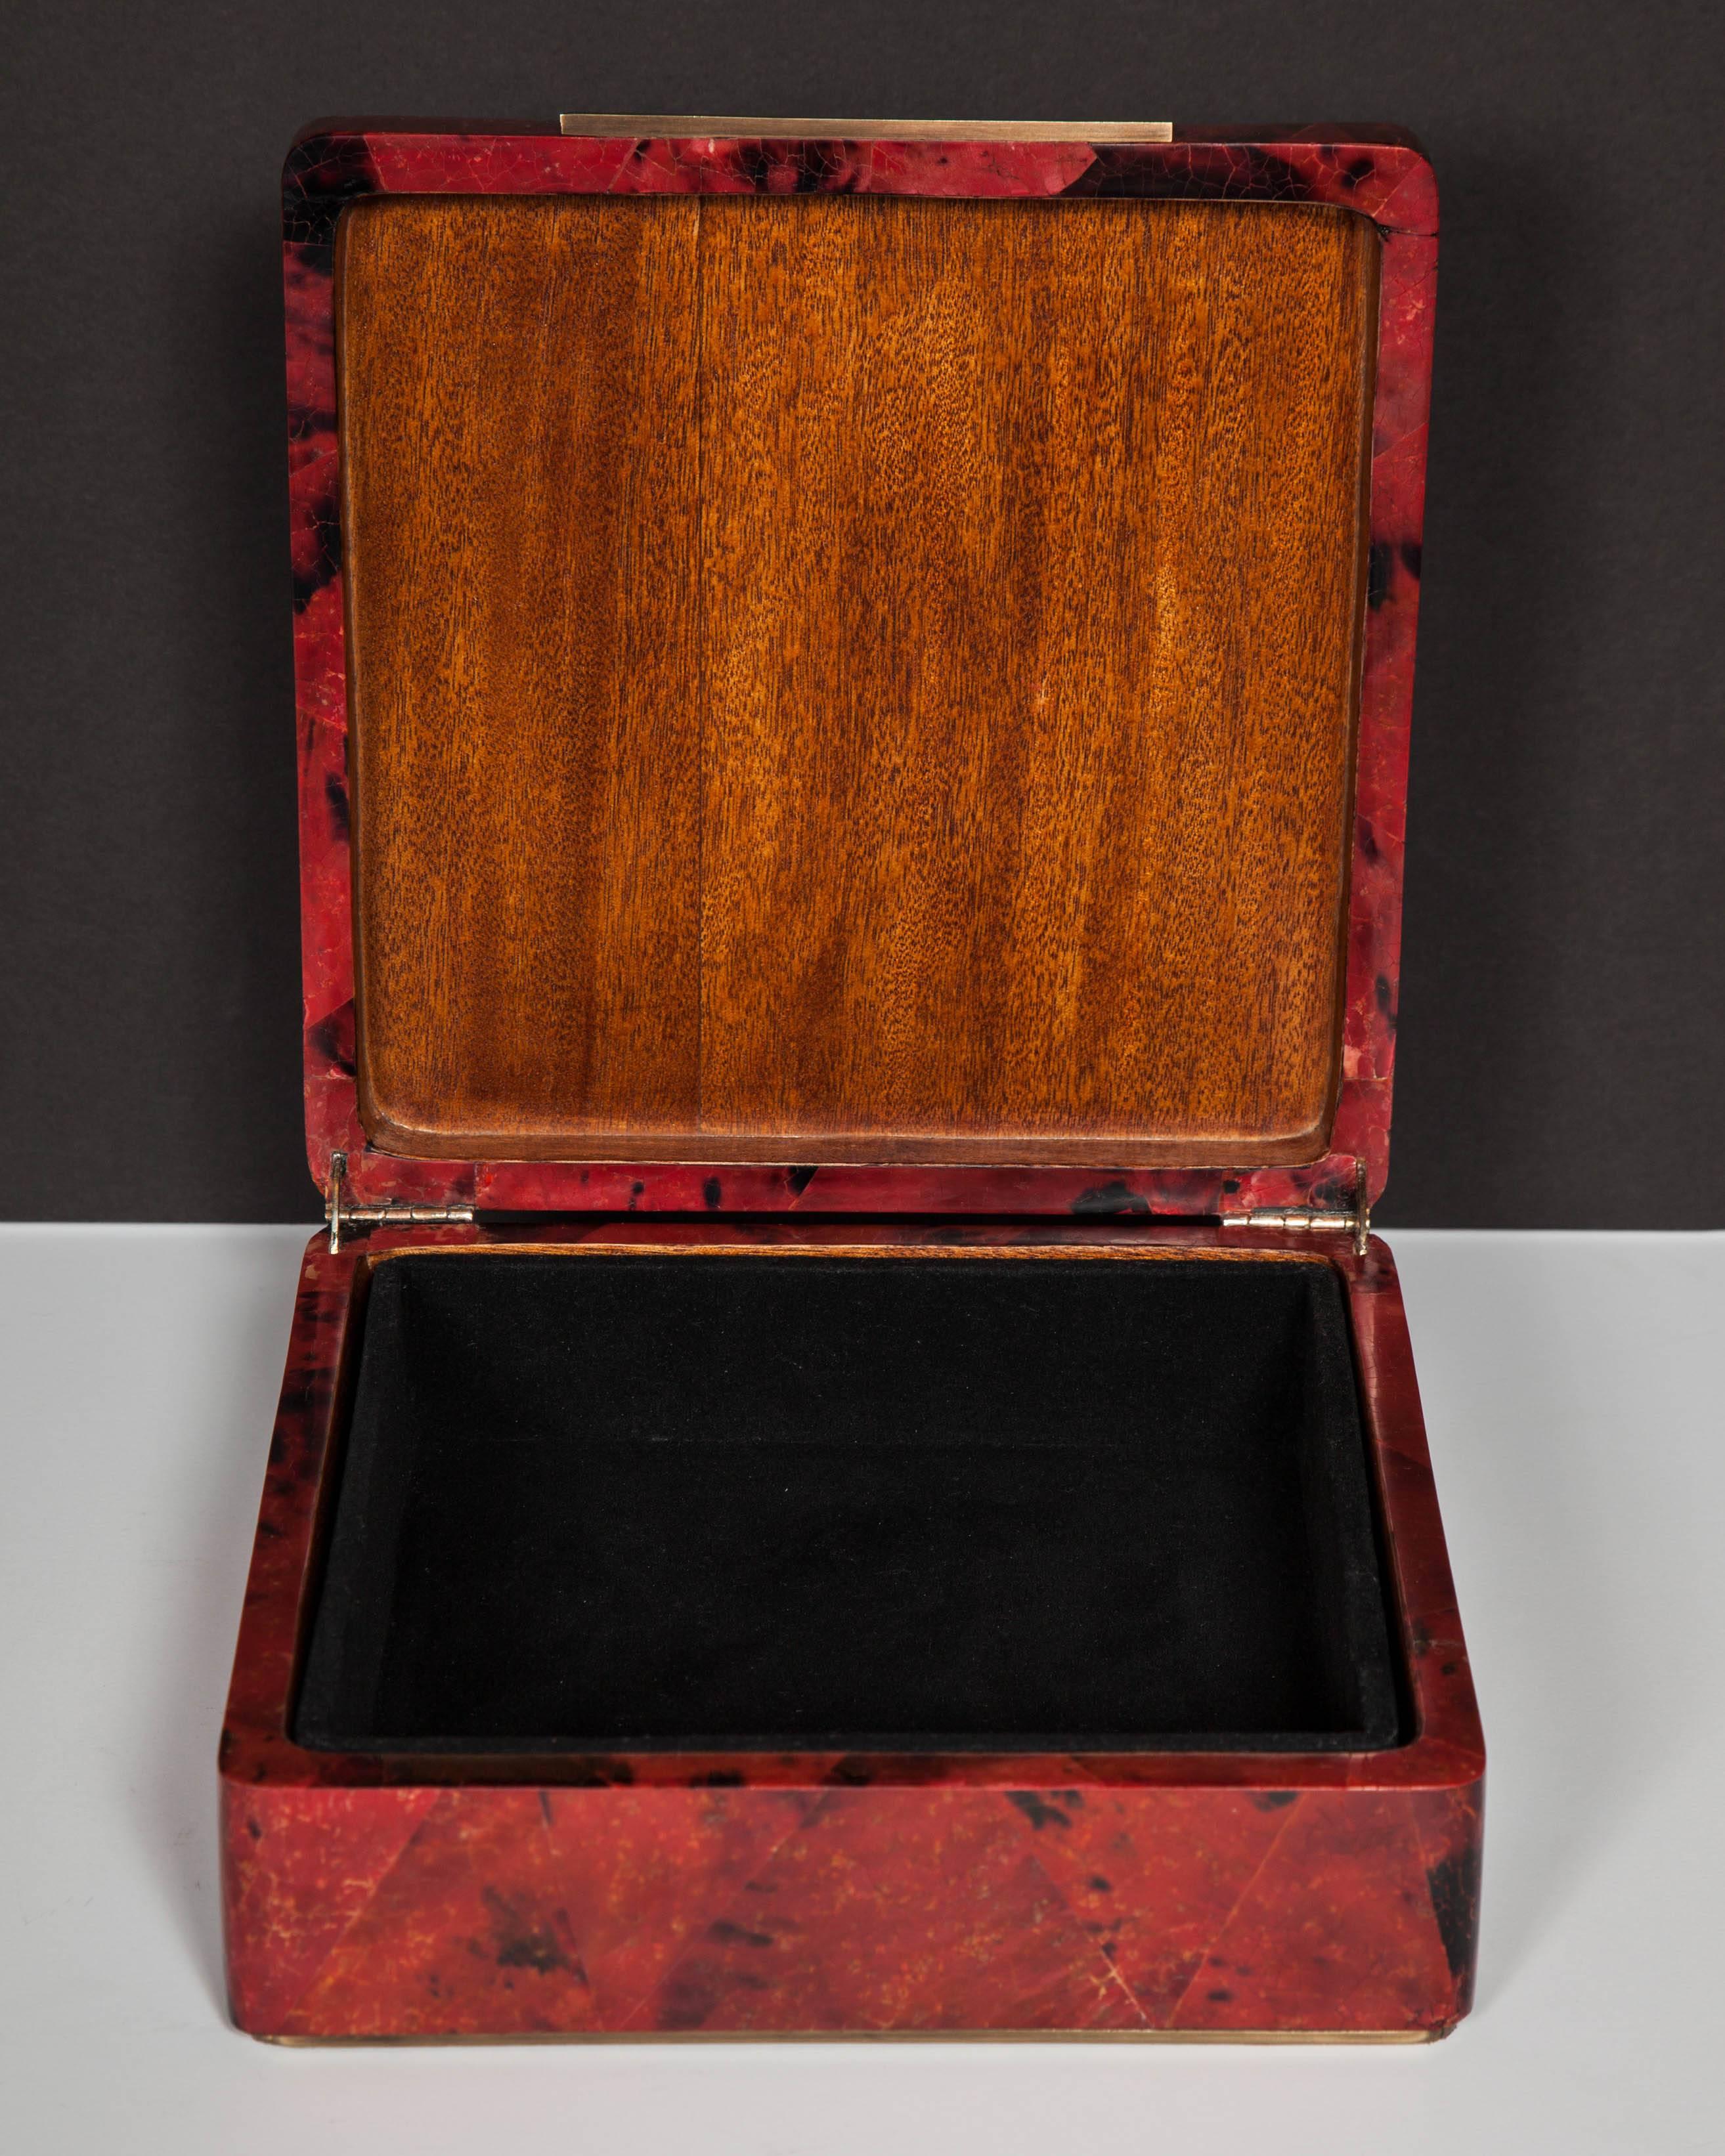 Hand-Crafted Pen Shell Box in Ruby Red with Geometric Inlay Design